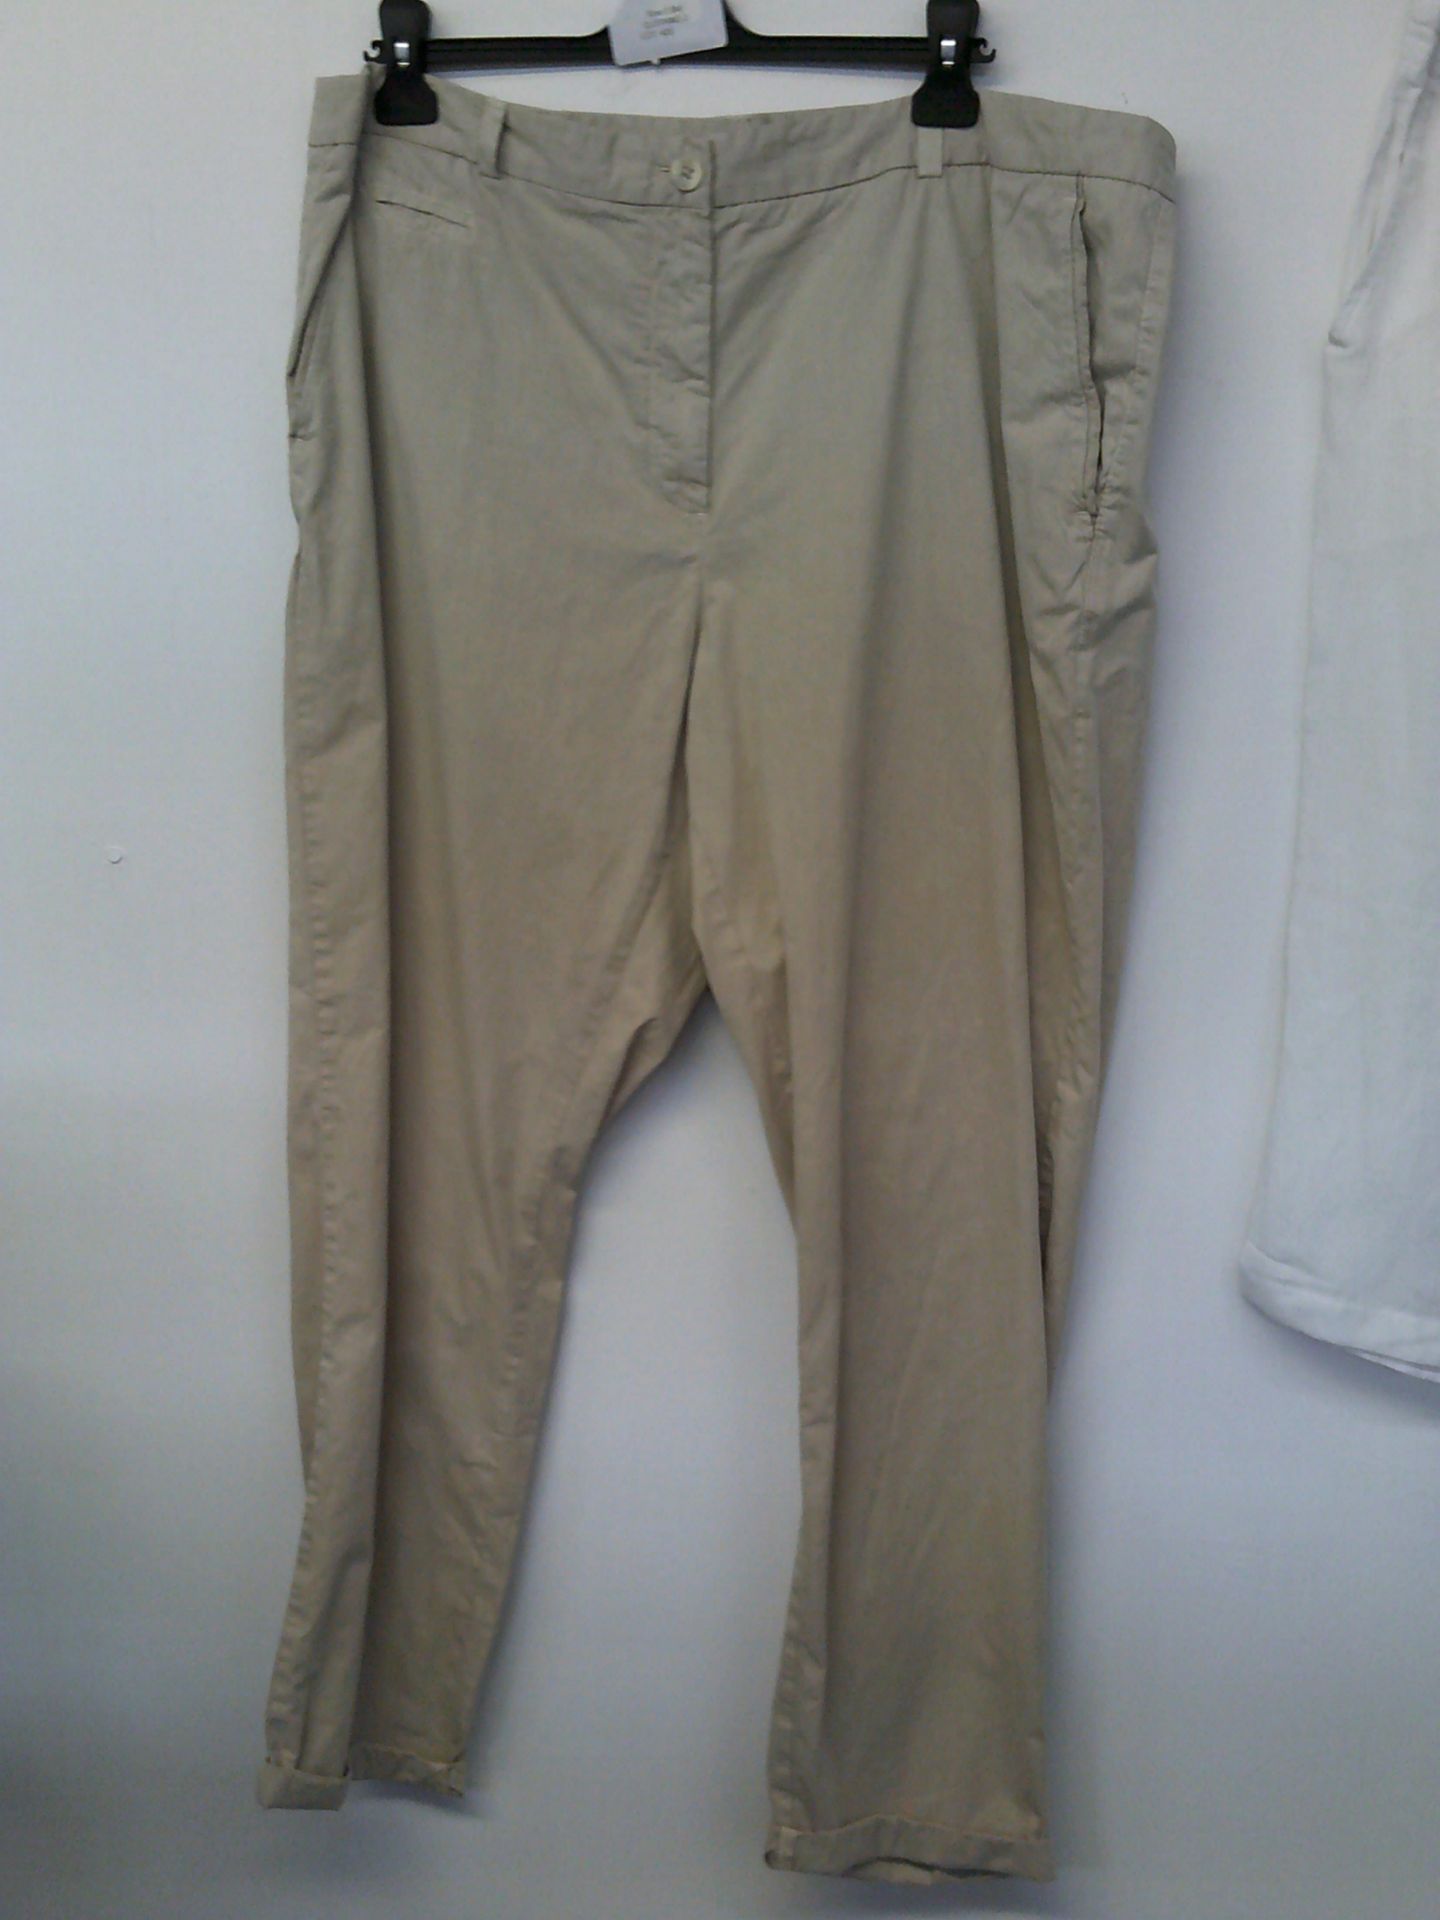 MARKS AND SPENCERS COTTON PANTS SIZE 20